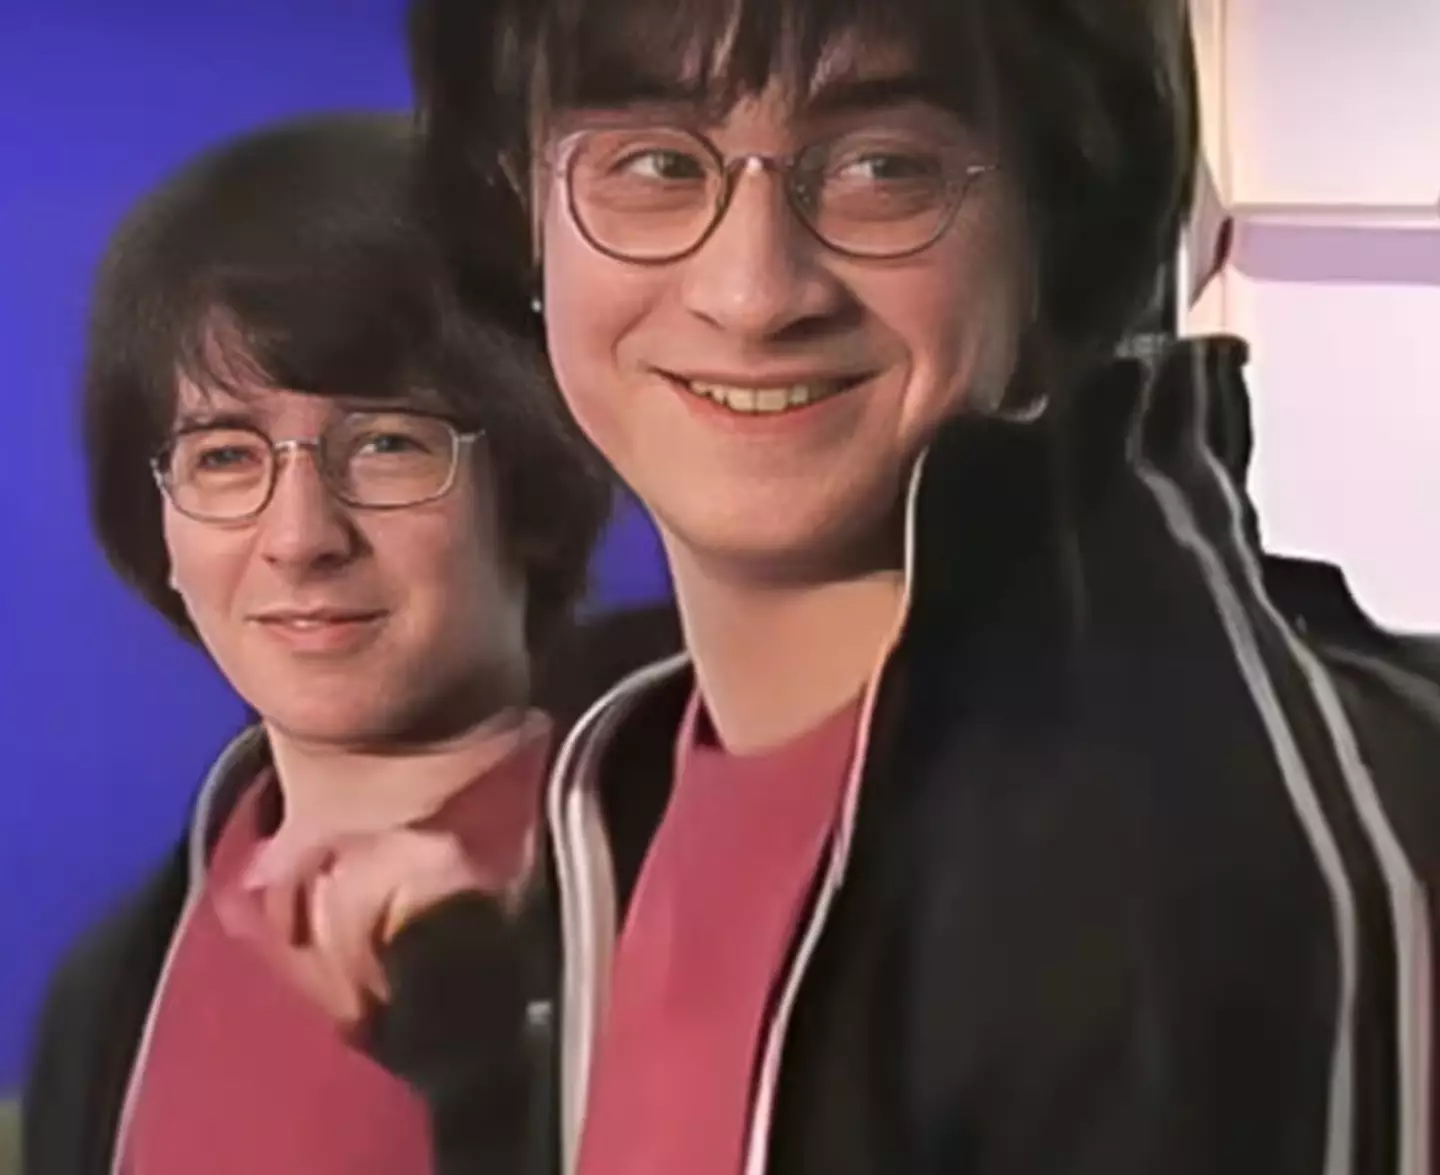 David Holmes and Daniel Radcliffe portrayed Harry Potter in the films.